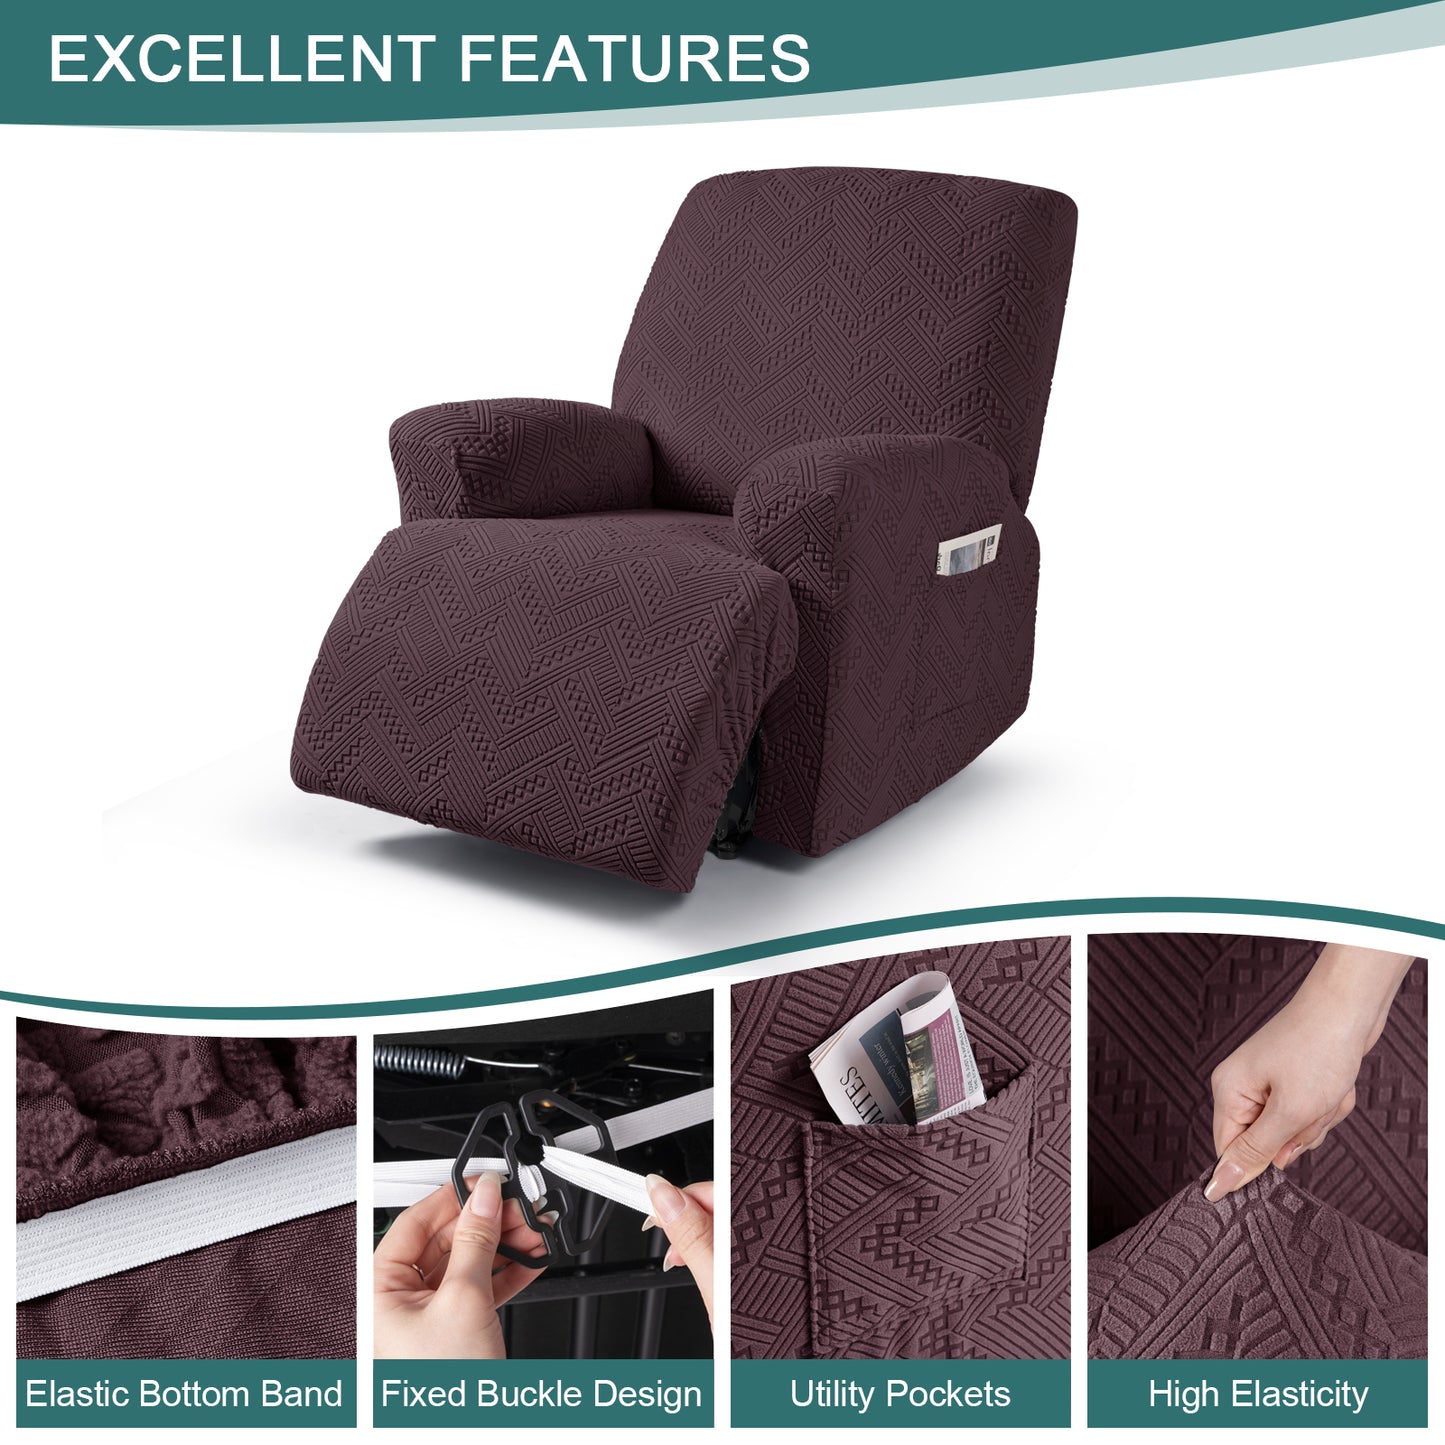 1 seat recliner chair slipcover